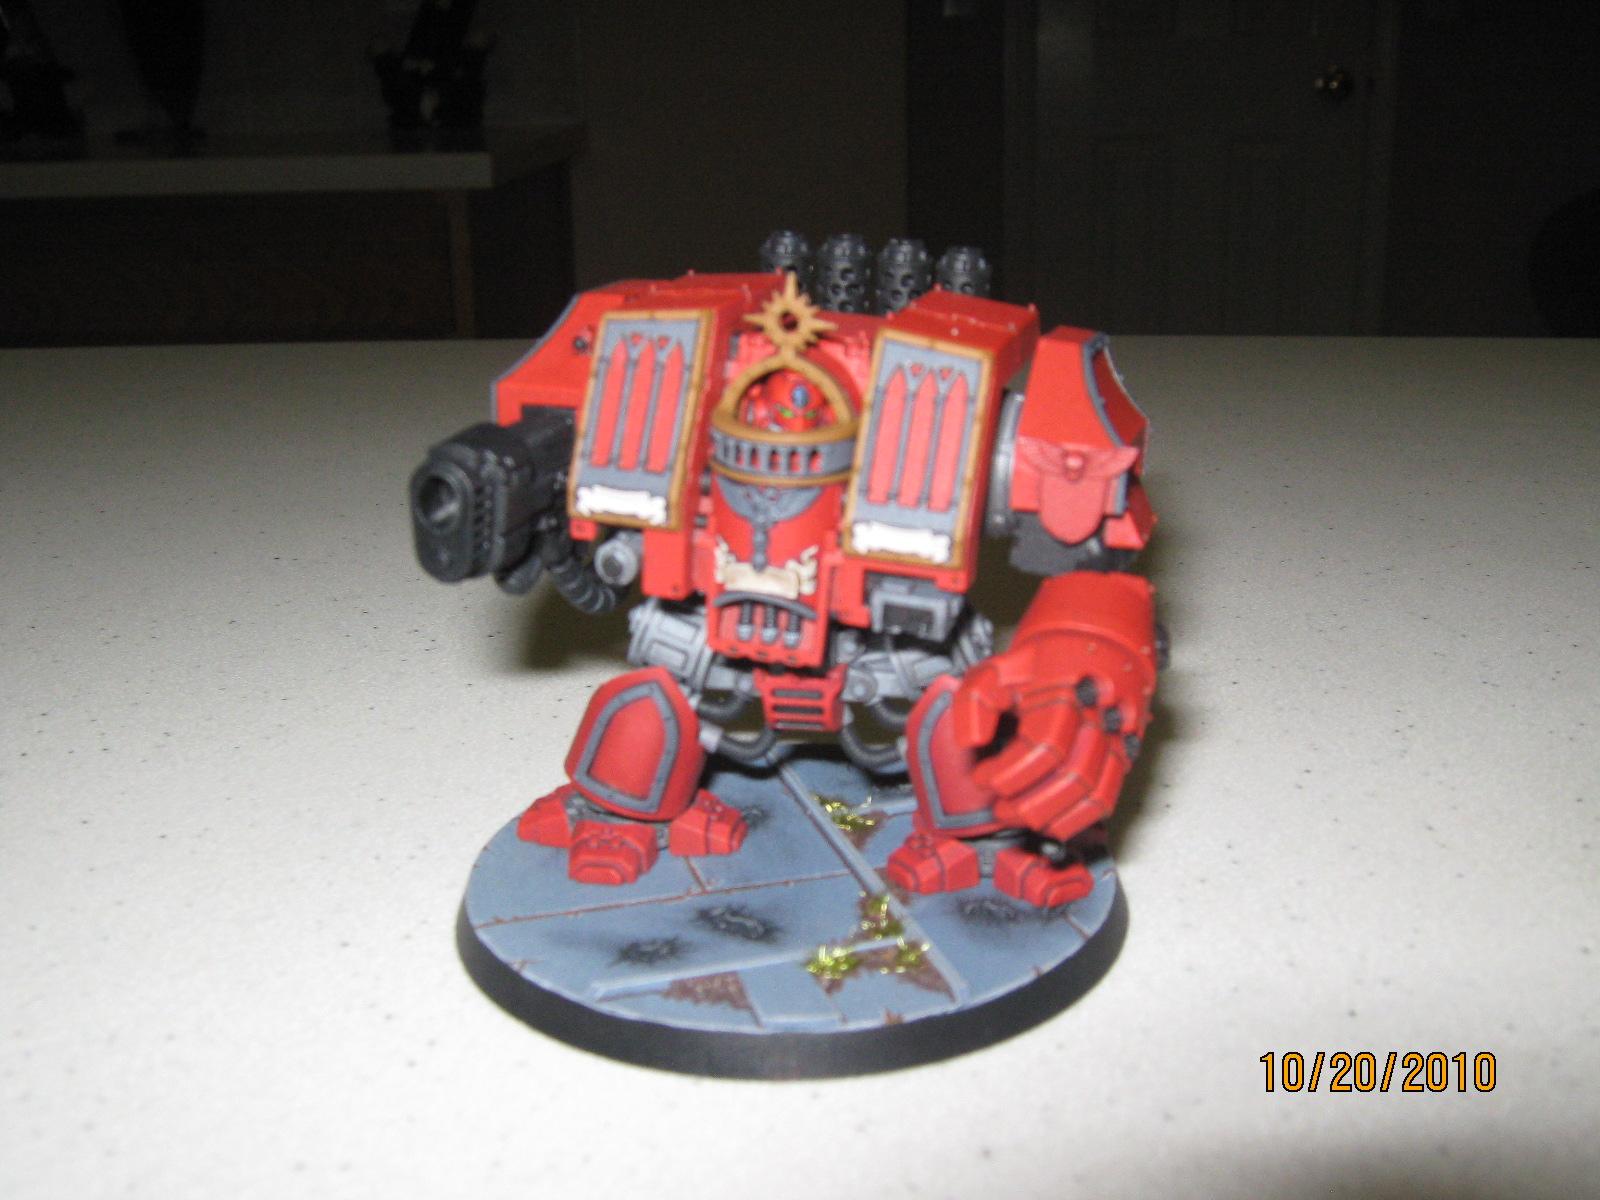 Blood Angels, Dreadnought, Space Marines, Warhammer 40,000